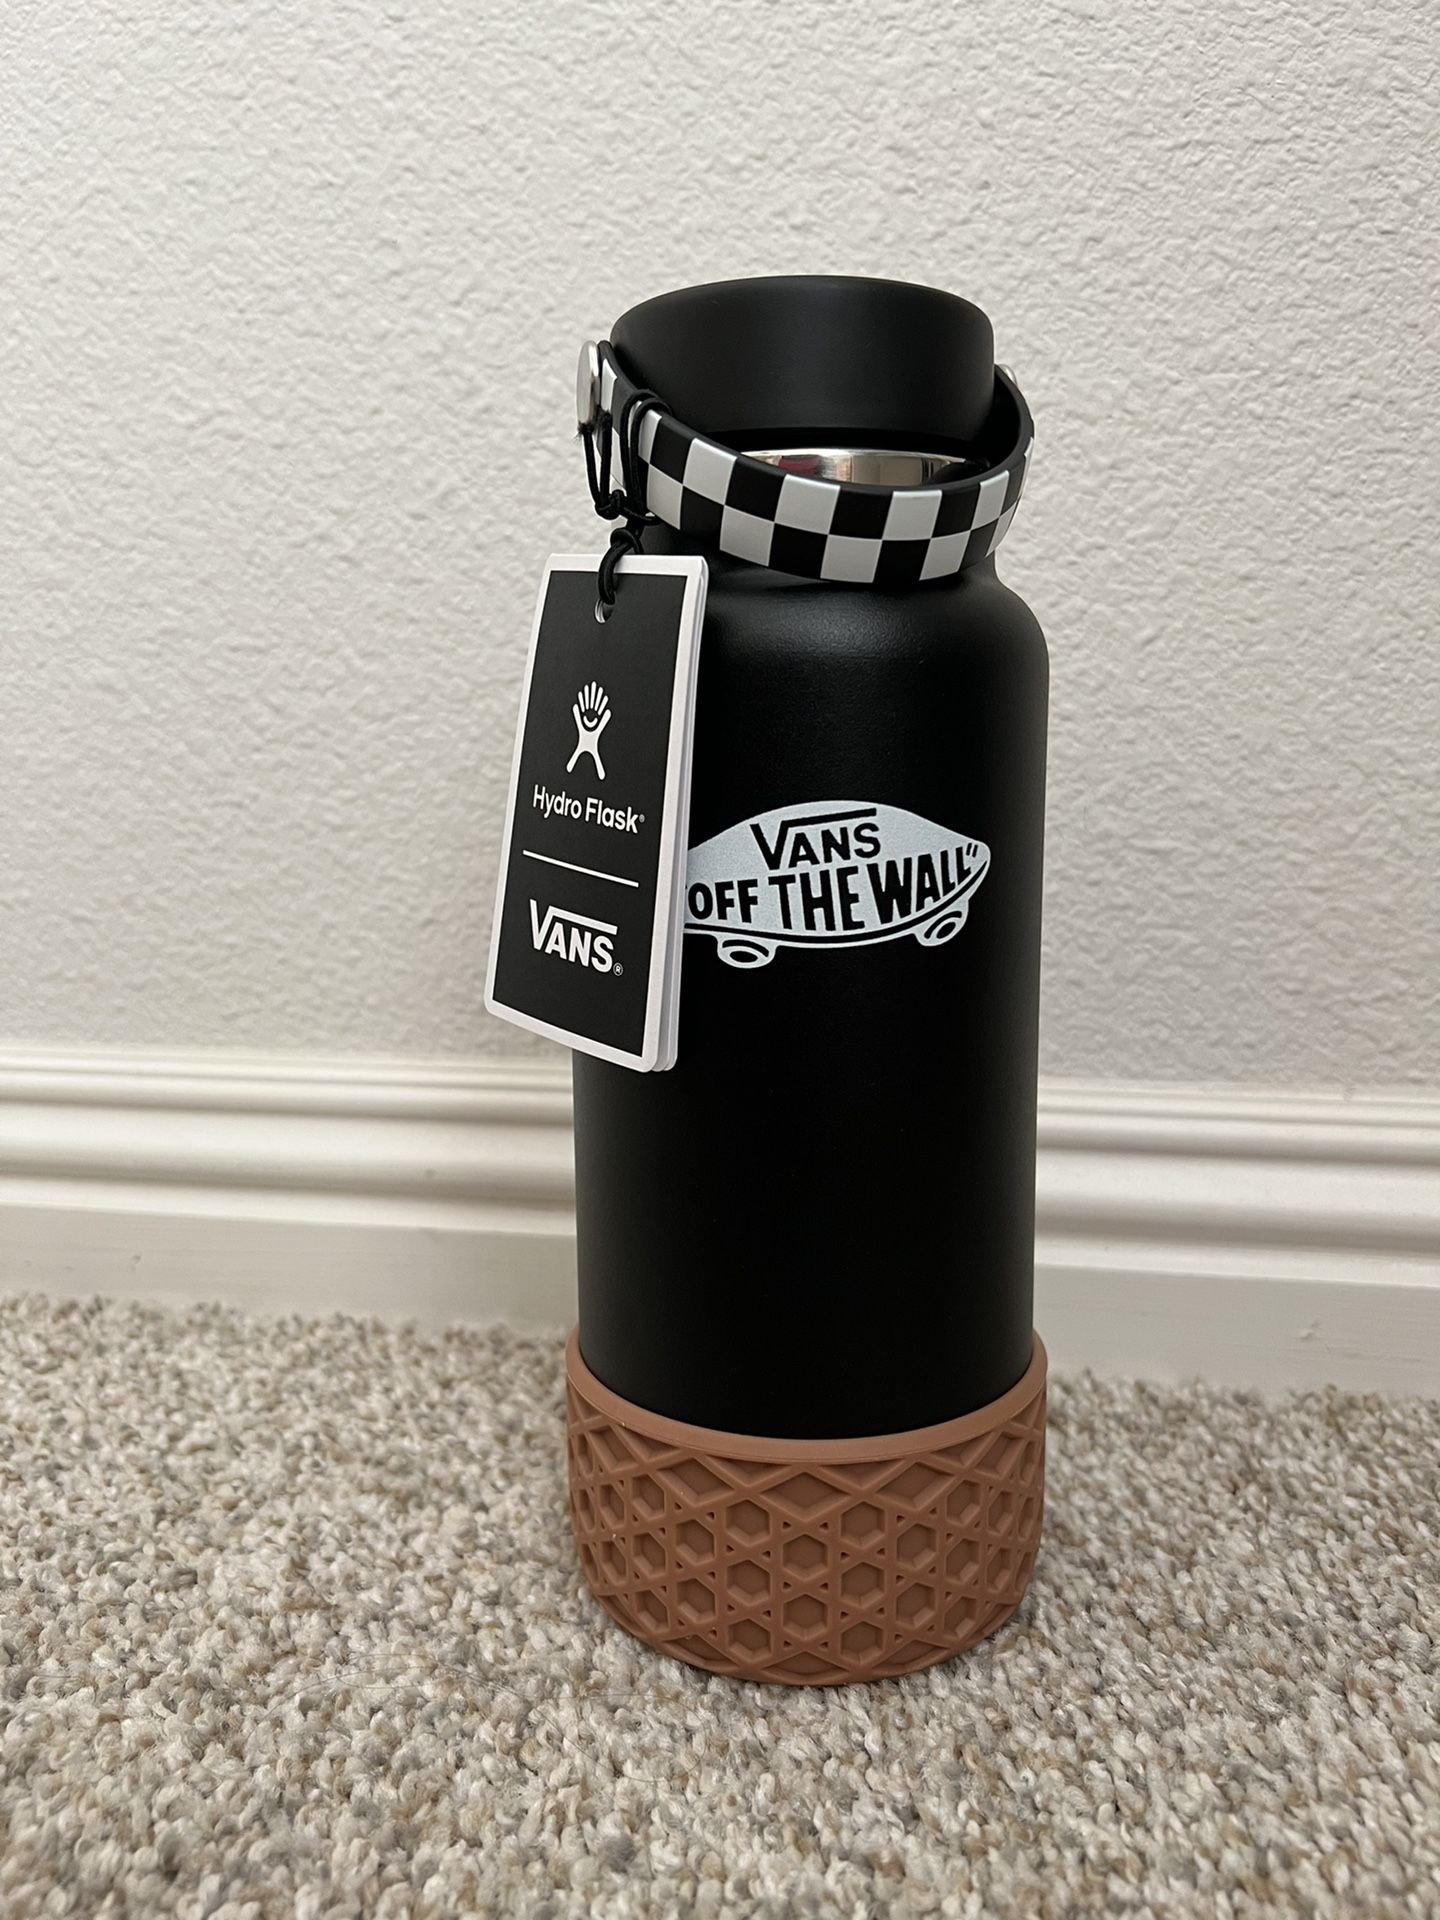 Vans Hydro Flask With Boot for Sale in Ventura, CA - OfferUp